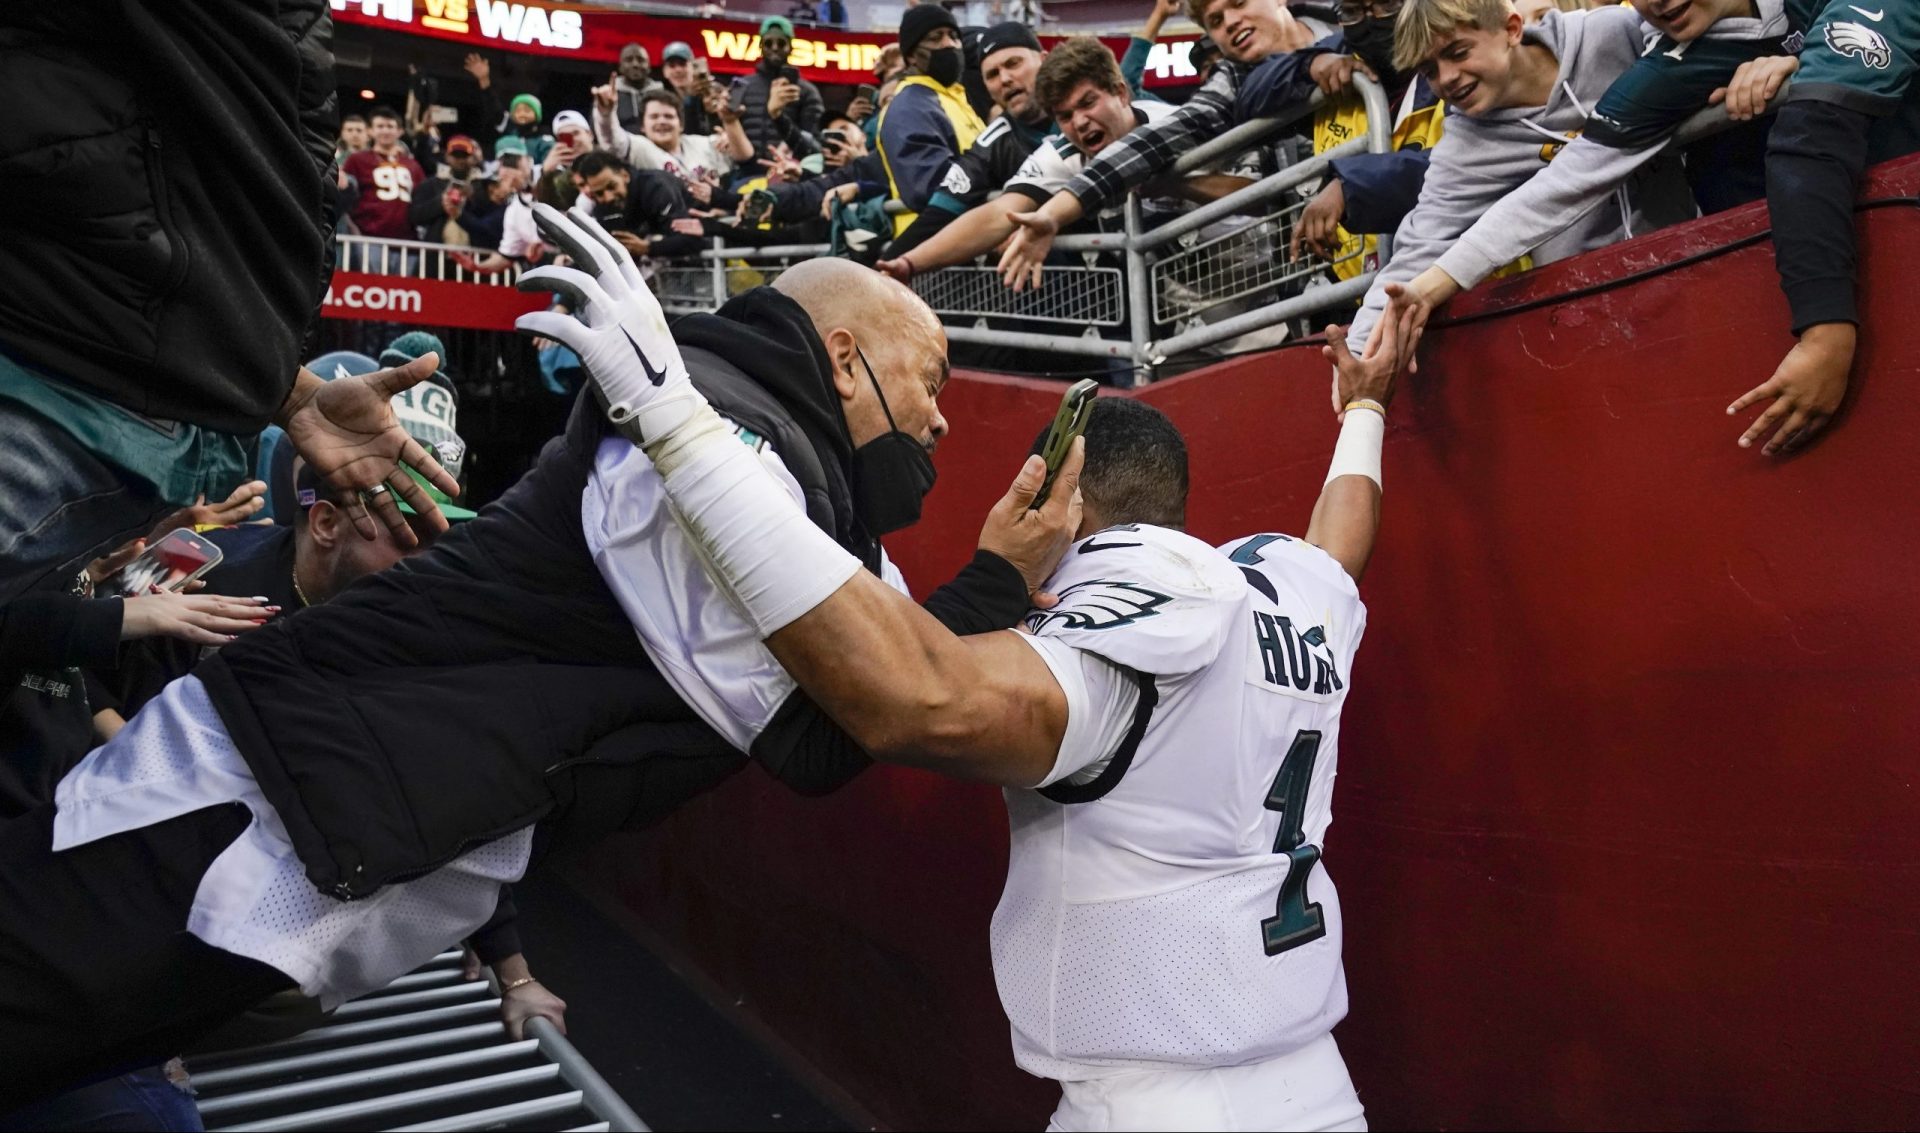 Fans falls onto Philadelphia Eagles quarterback Jalen Hurts (1) as the railing collapsed following the end of an NFL football game, Sunday, Jan. 2, 2022, in Landover, Md. Philadelphia won 20-16.